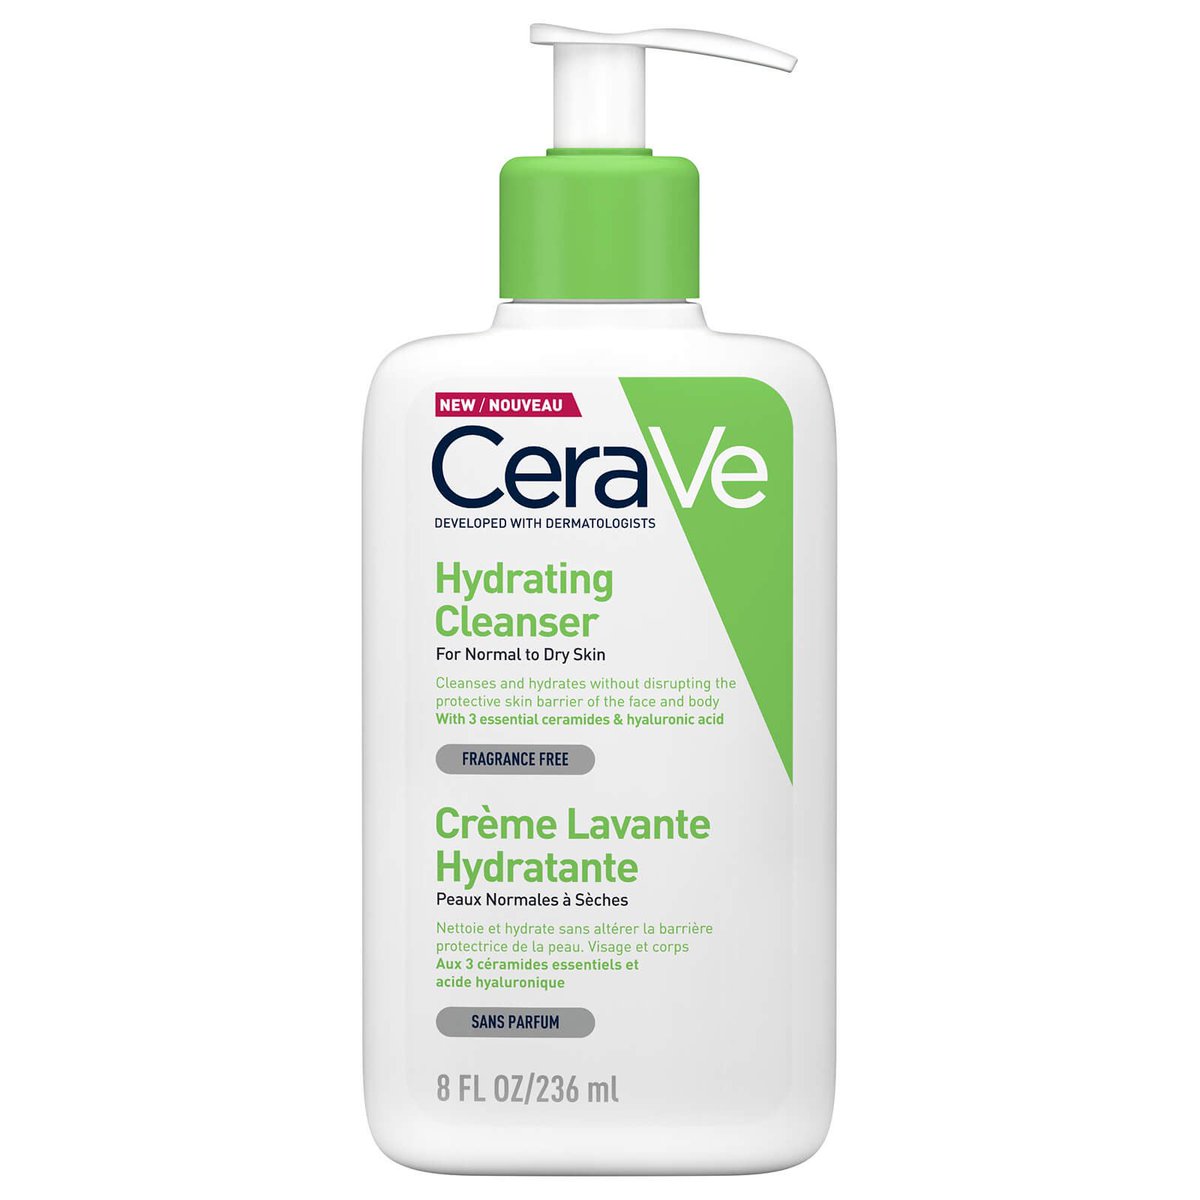 Cleansers: Everyone knows my two favorite from the Drugstore are the Cerave Renewing SA Cleanser & Hydrating Cleanser. Elf has a great cleasner w/ Niacinamide + Pixi makes one of my best Vitamin C Cleansing waters.